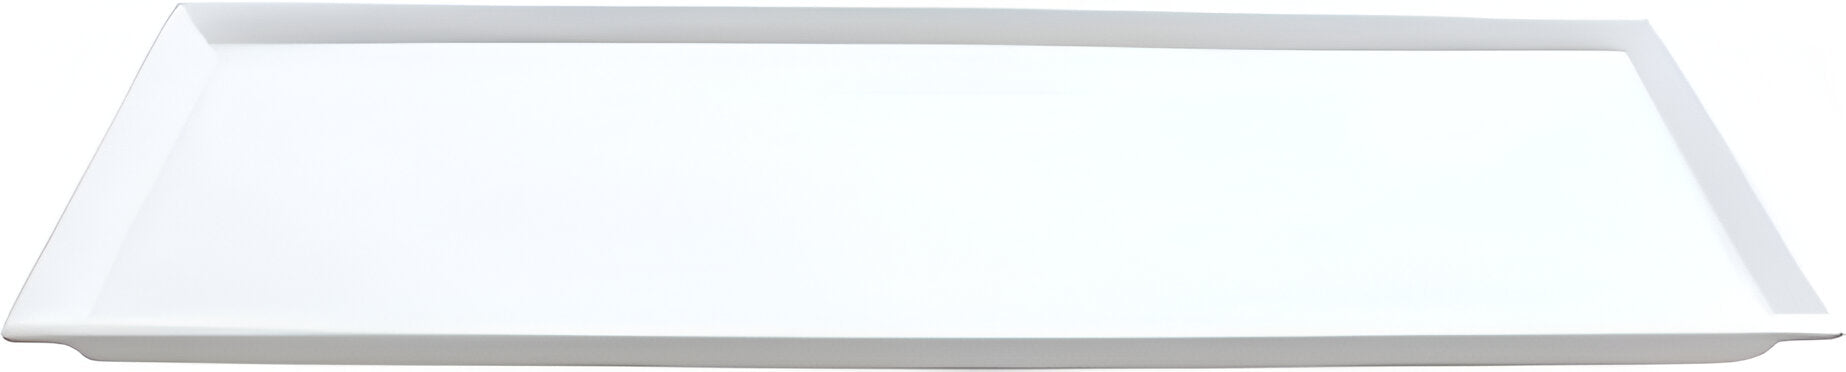 Bugambilia - Mod 6.73" White Rectangular Serving Plate With Lid Cover - LCIH1/9-MOD-WW